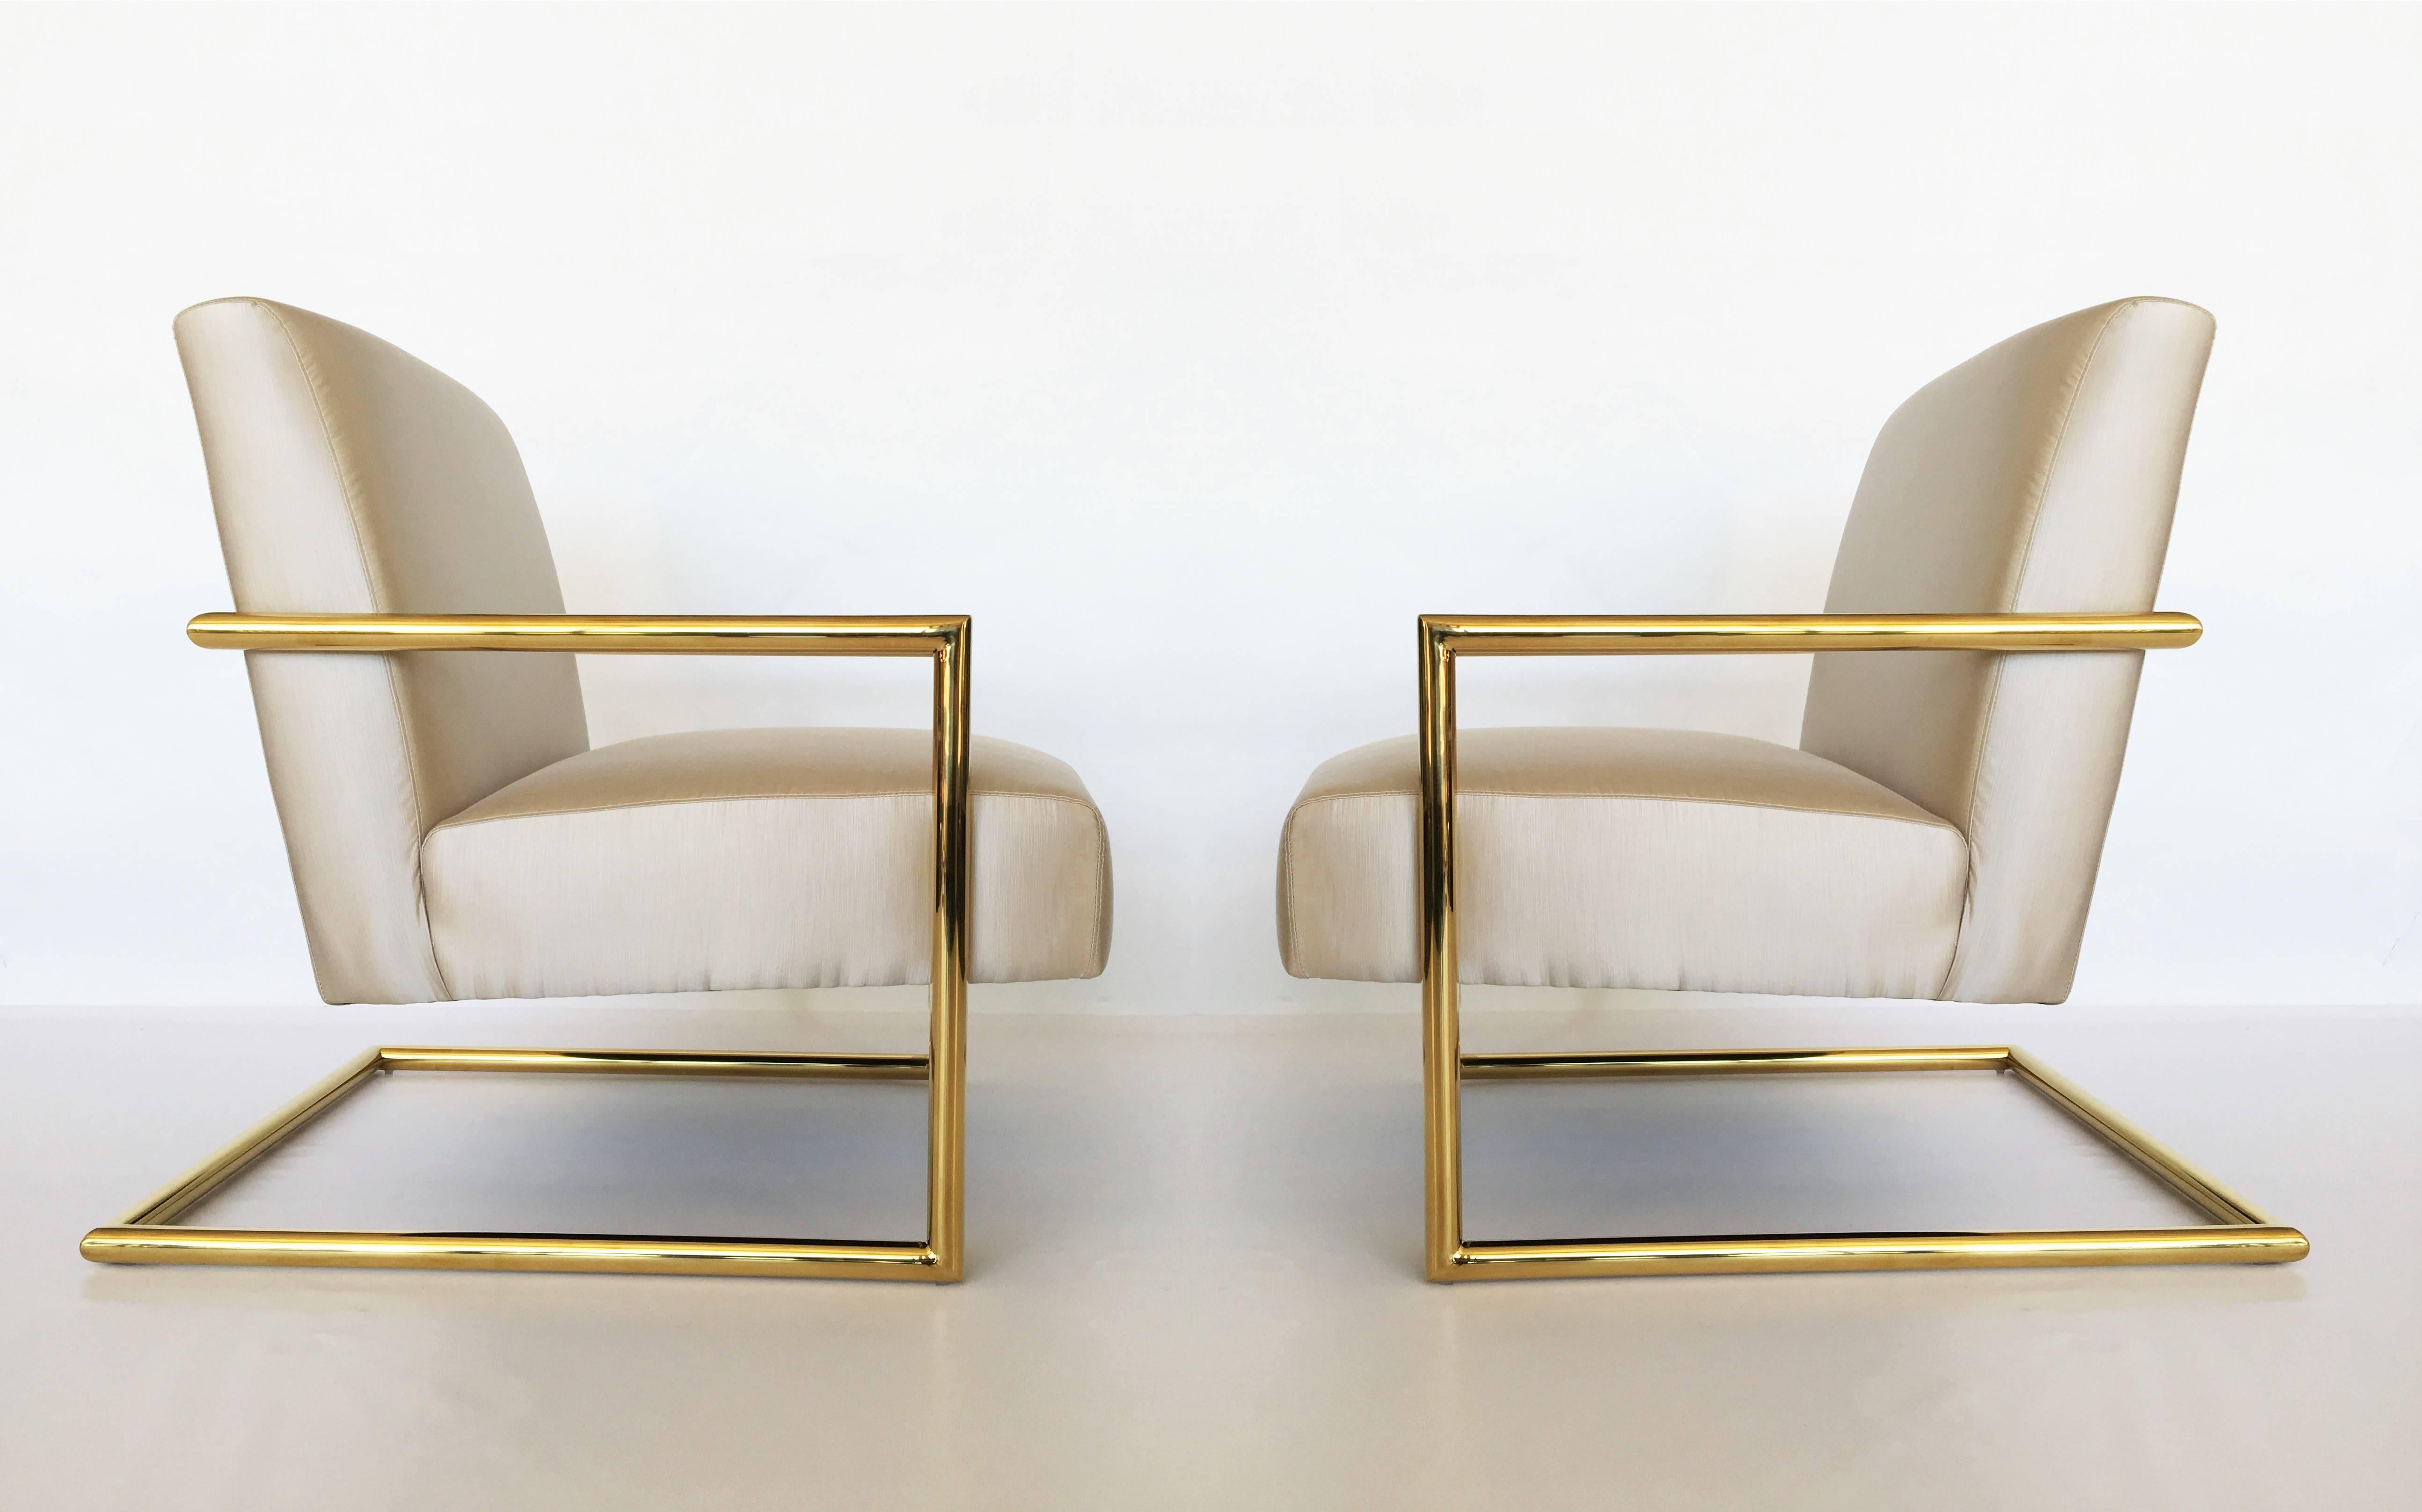 Great pair of cantilevered lounge chairs designed in the style of Milo Baughman for Thayer Coggin, American, 1970s. With frame in tubular polished brass and champagne silk upholstery. Simple yet elegant modern design. Very comfortable as having a